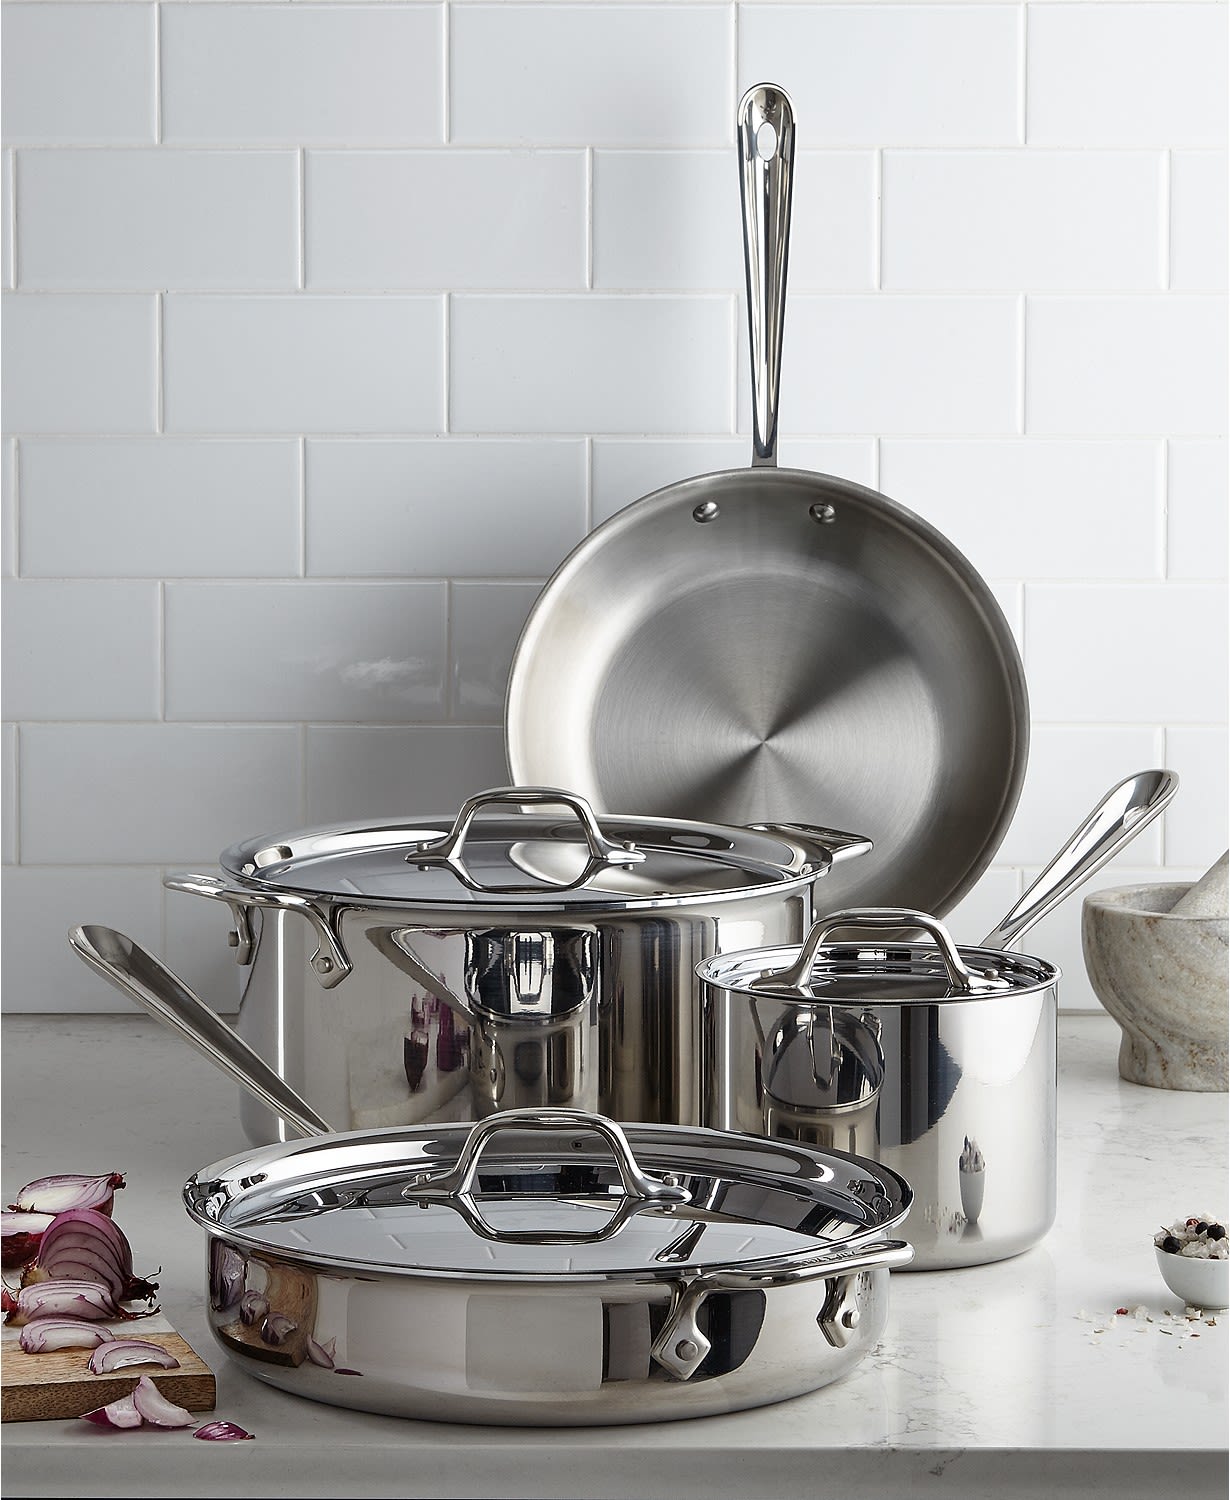 All-Clad Essentials Hard Anodized Nonstick Cookware Set, 2-piece Fry and  Sauce Pan with lid Set - Macy's